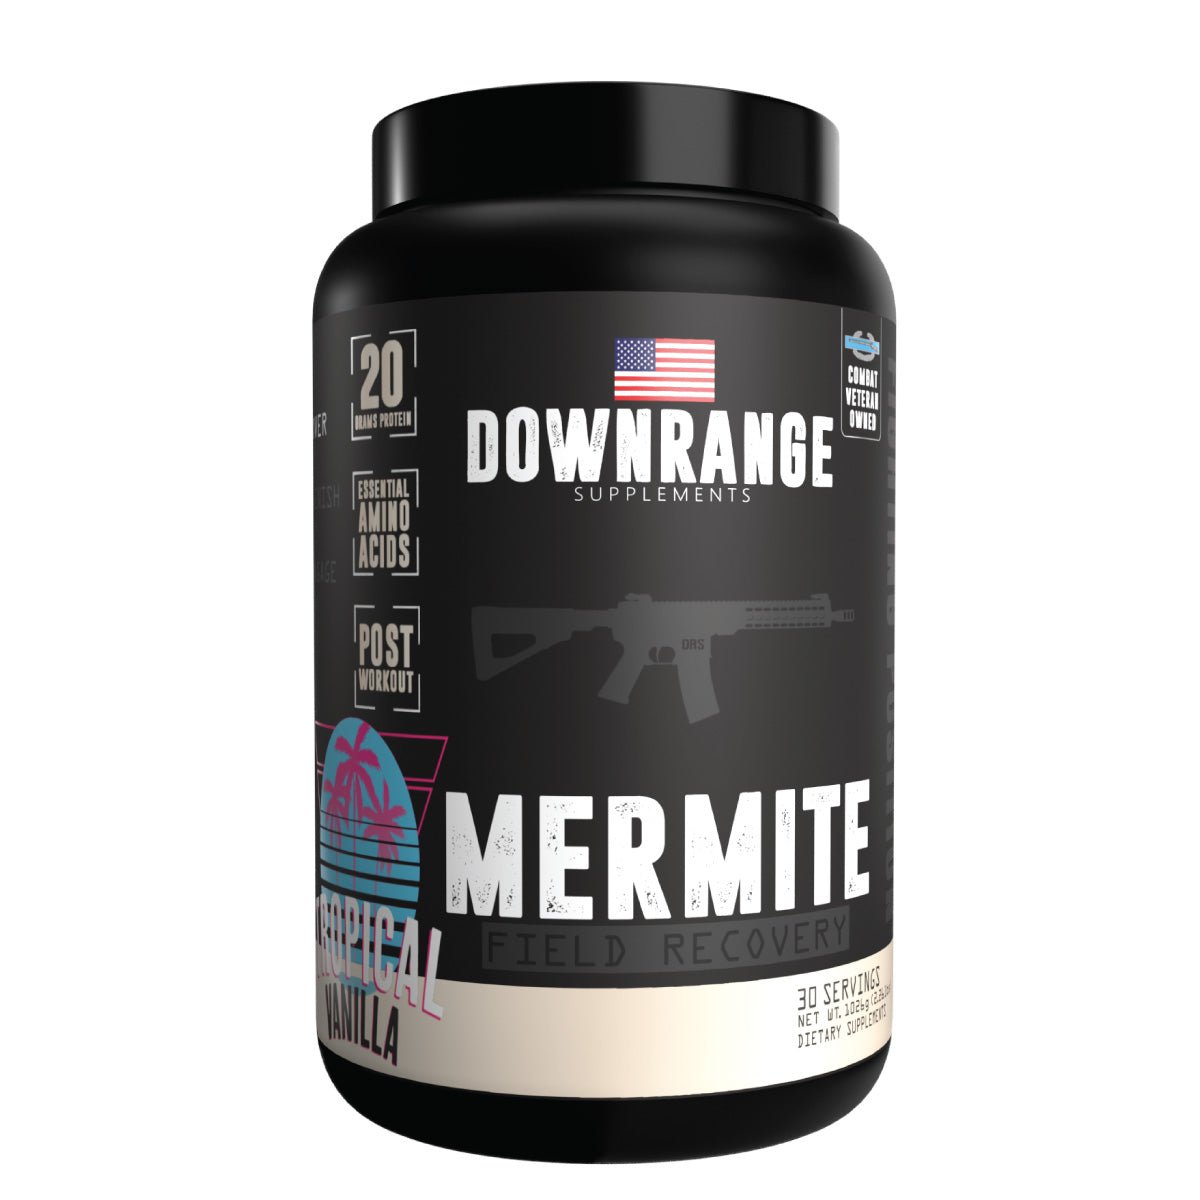 FIELD RECOVERY PROTEIN - DownRange Supplements